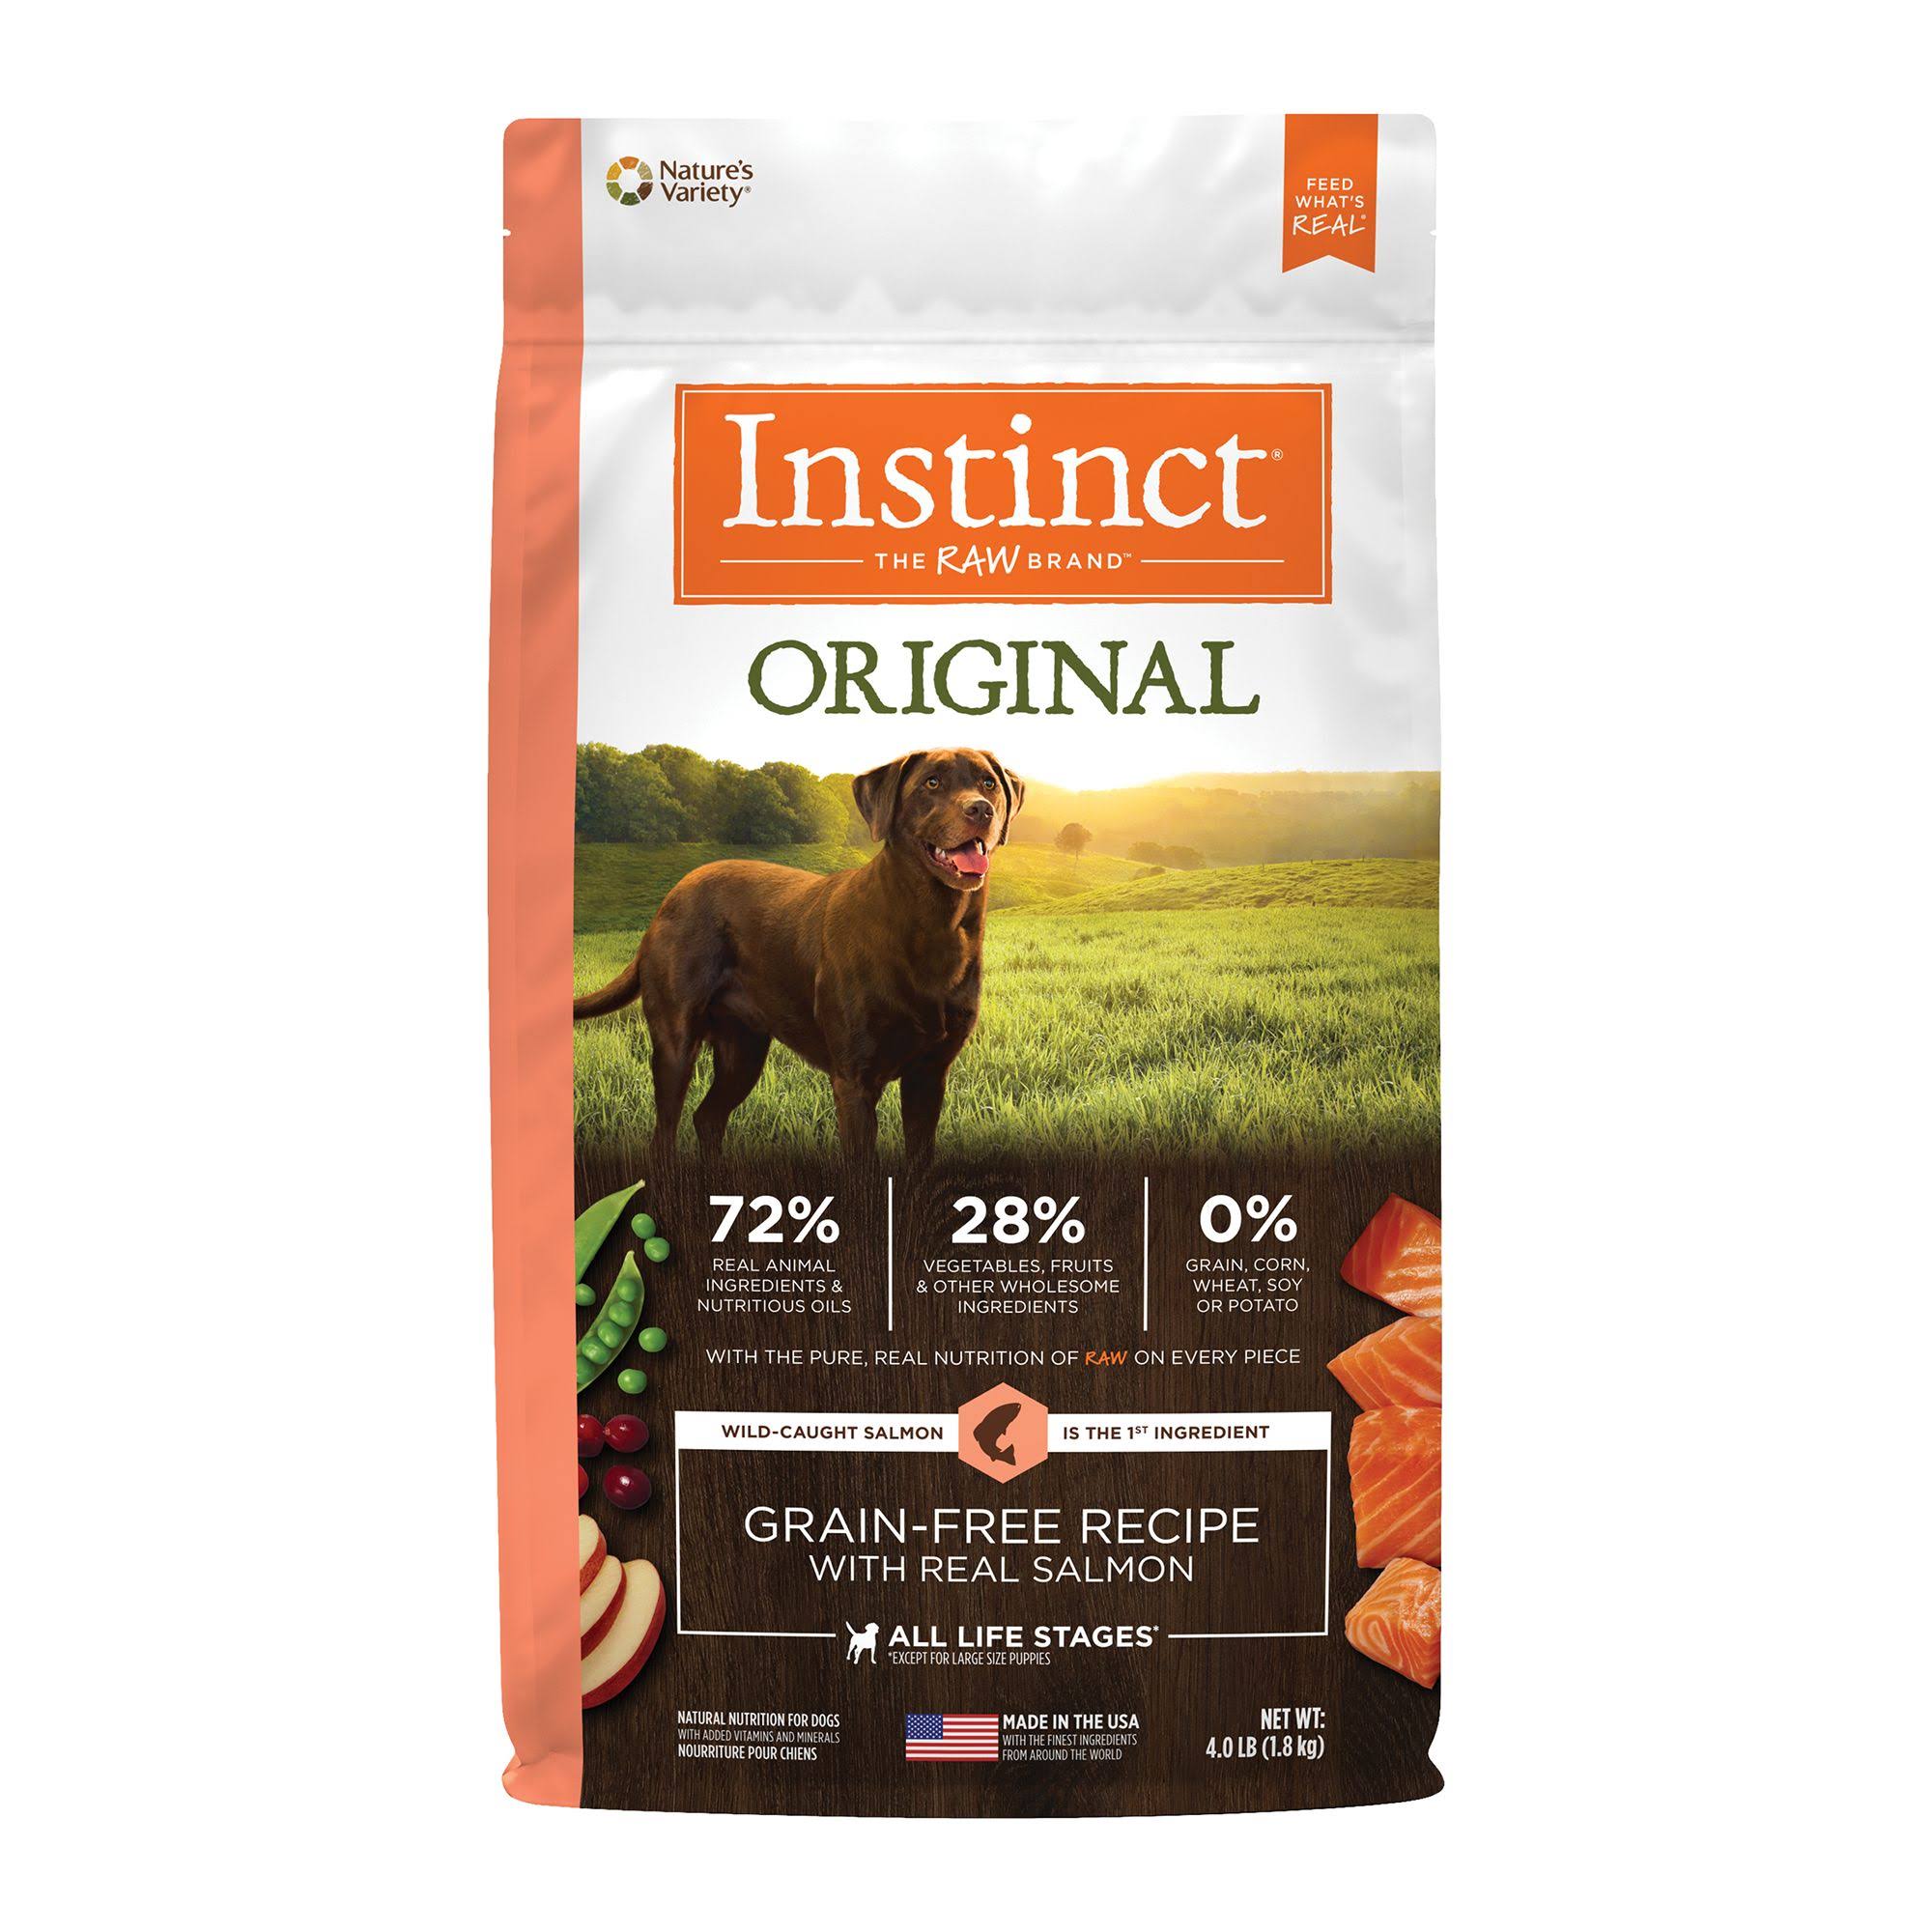 Nature's Variety Instinct Grain-Free Beef & Lamb Meal Dry Dog Food